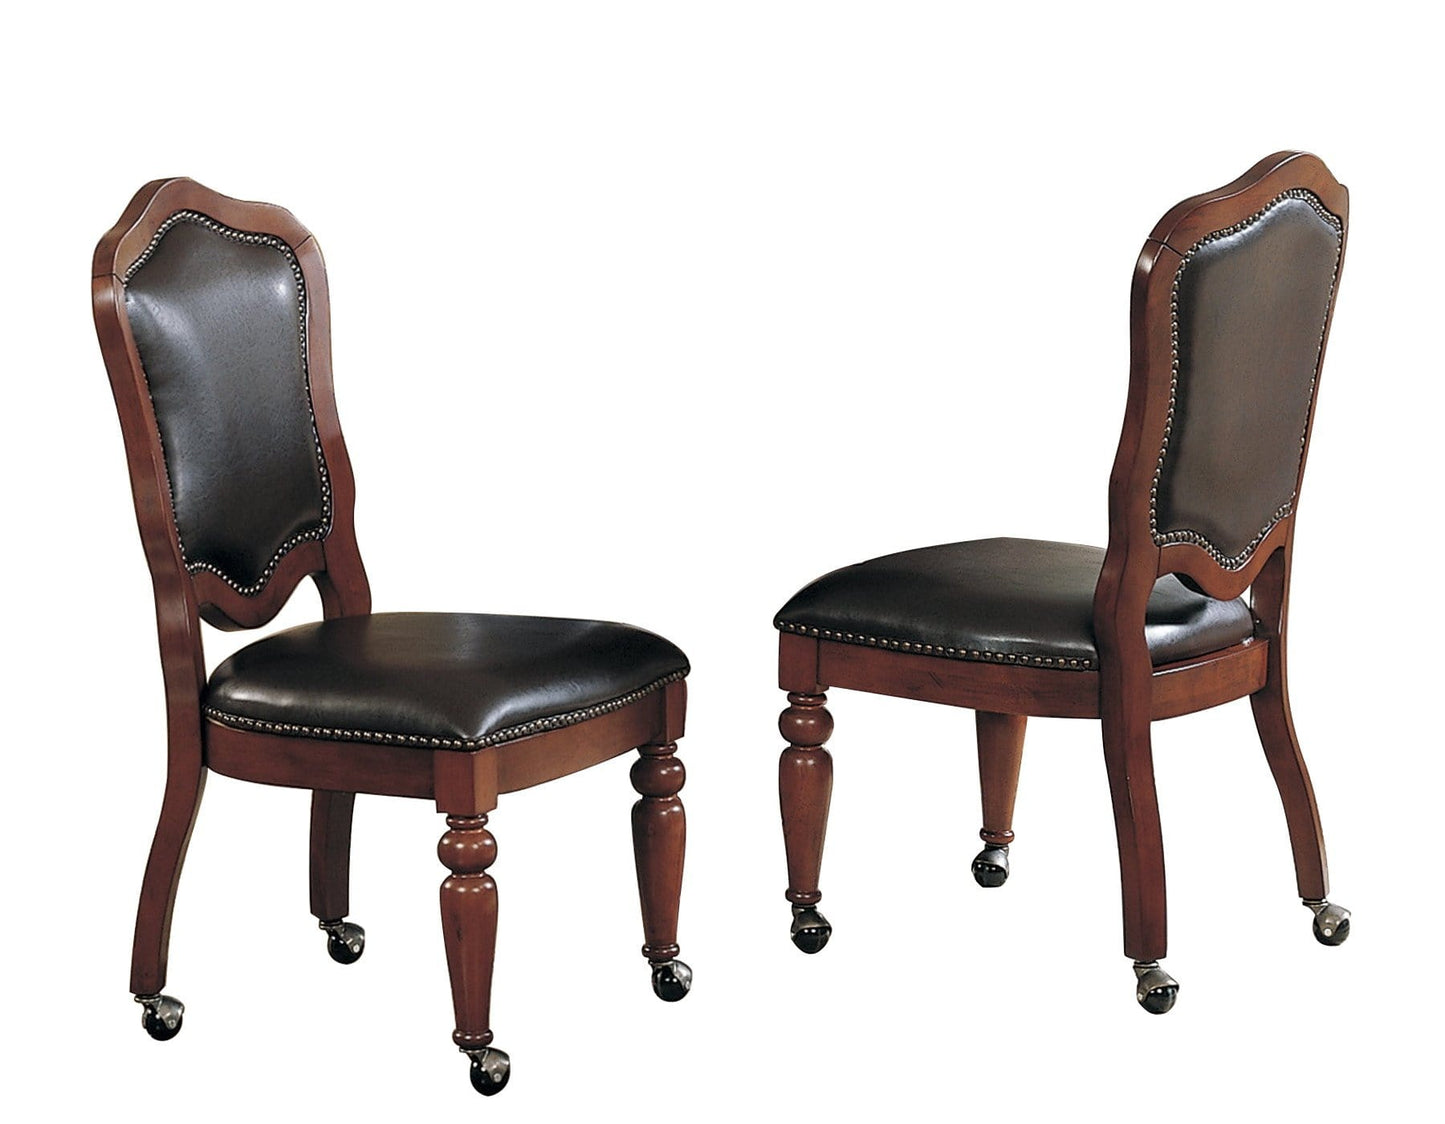 Set of two dining chairs with casters